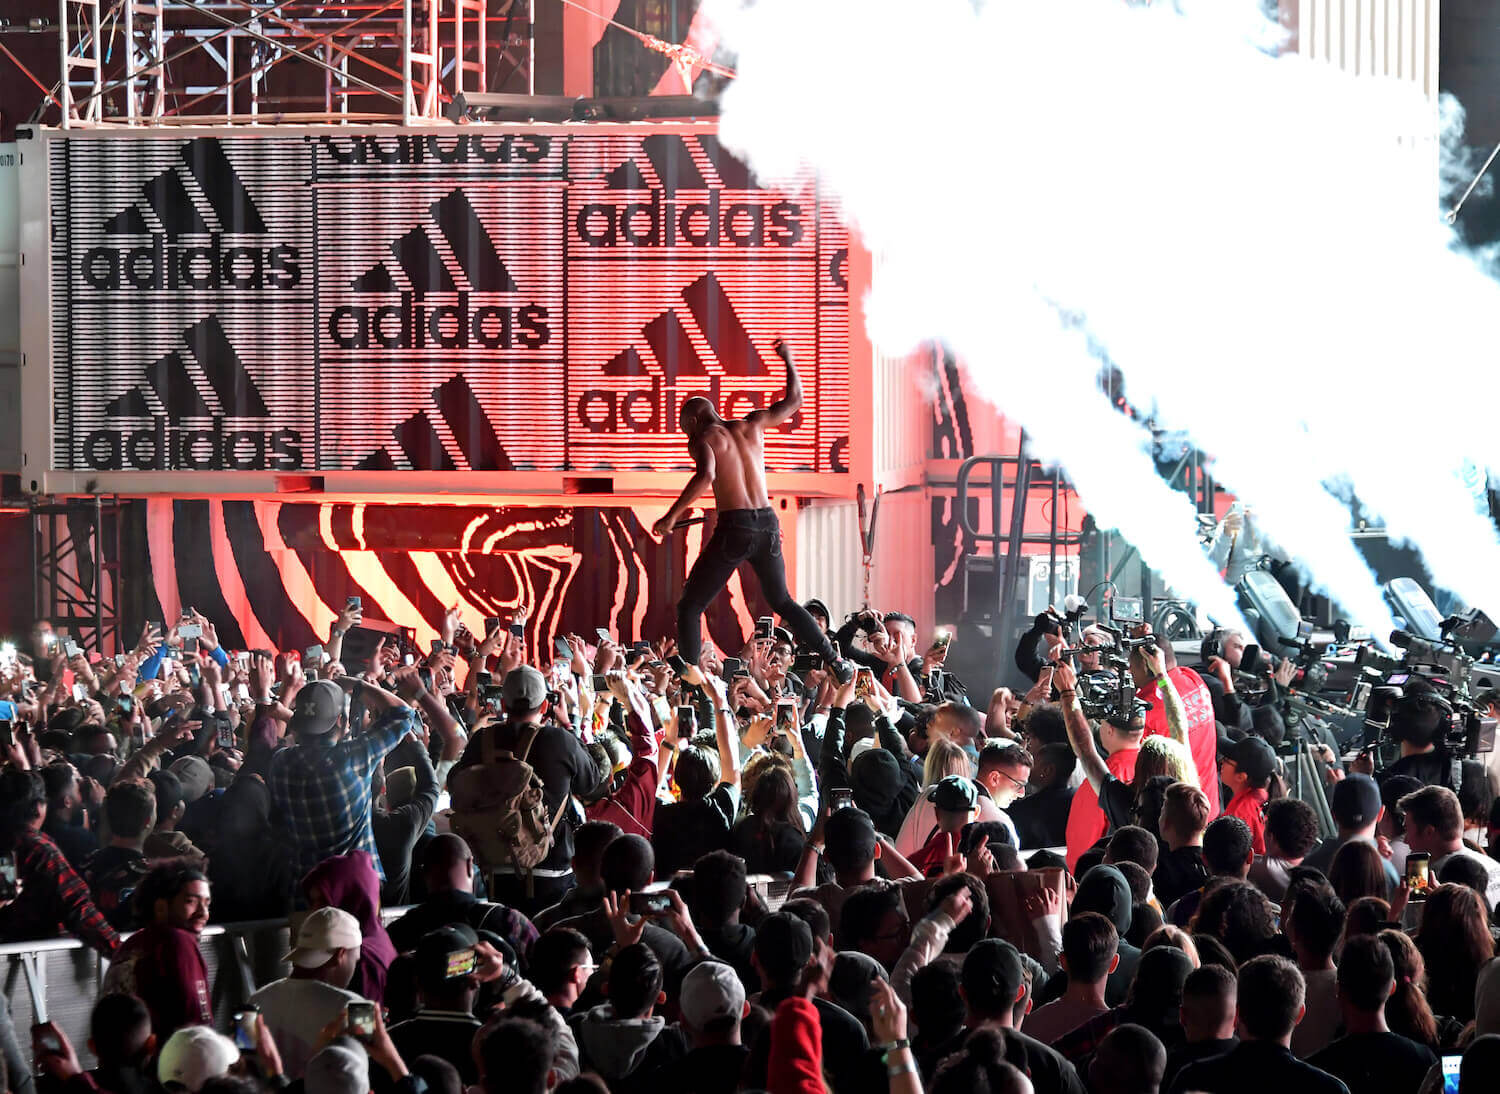 adidas' 747 Warehouse St. brought together Creativity, Innovative